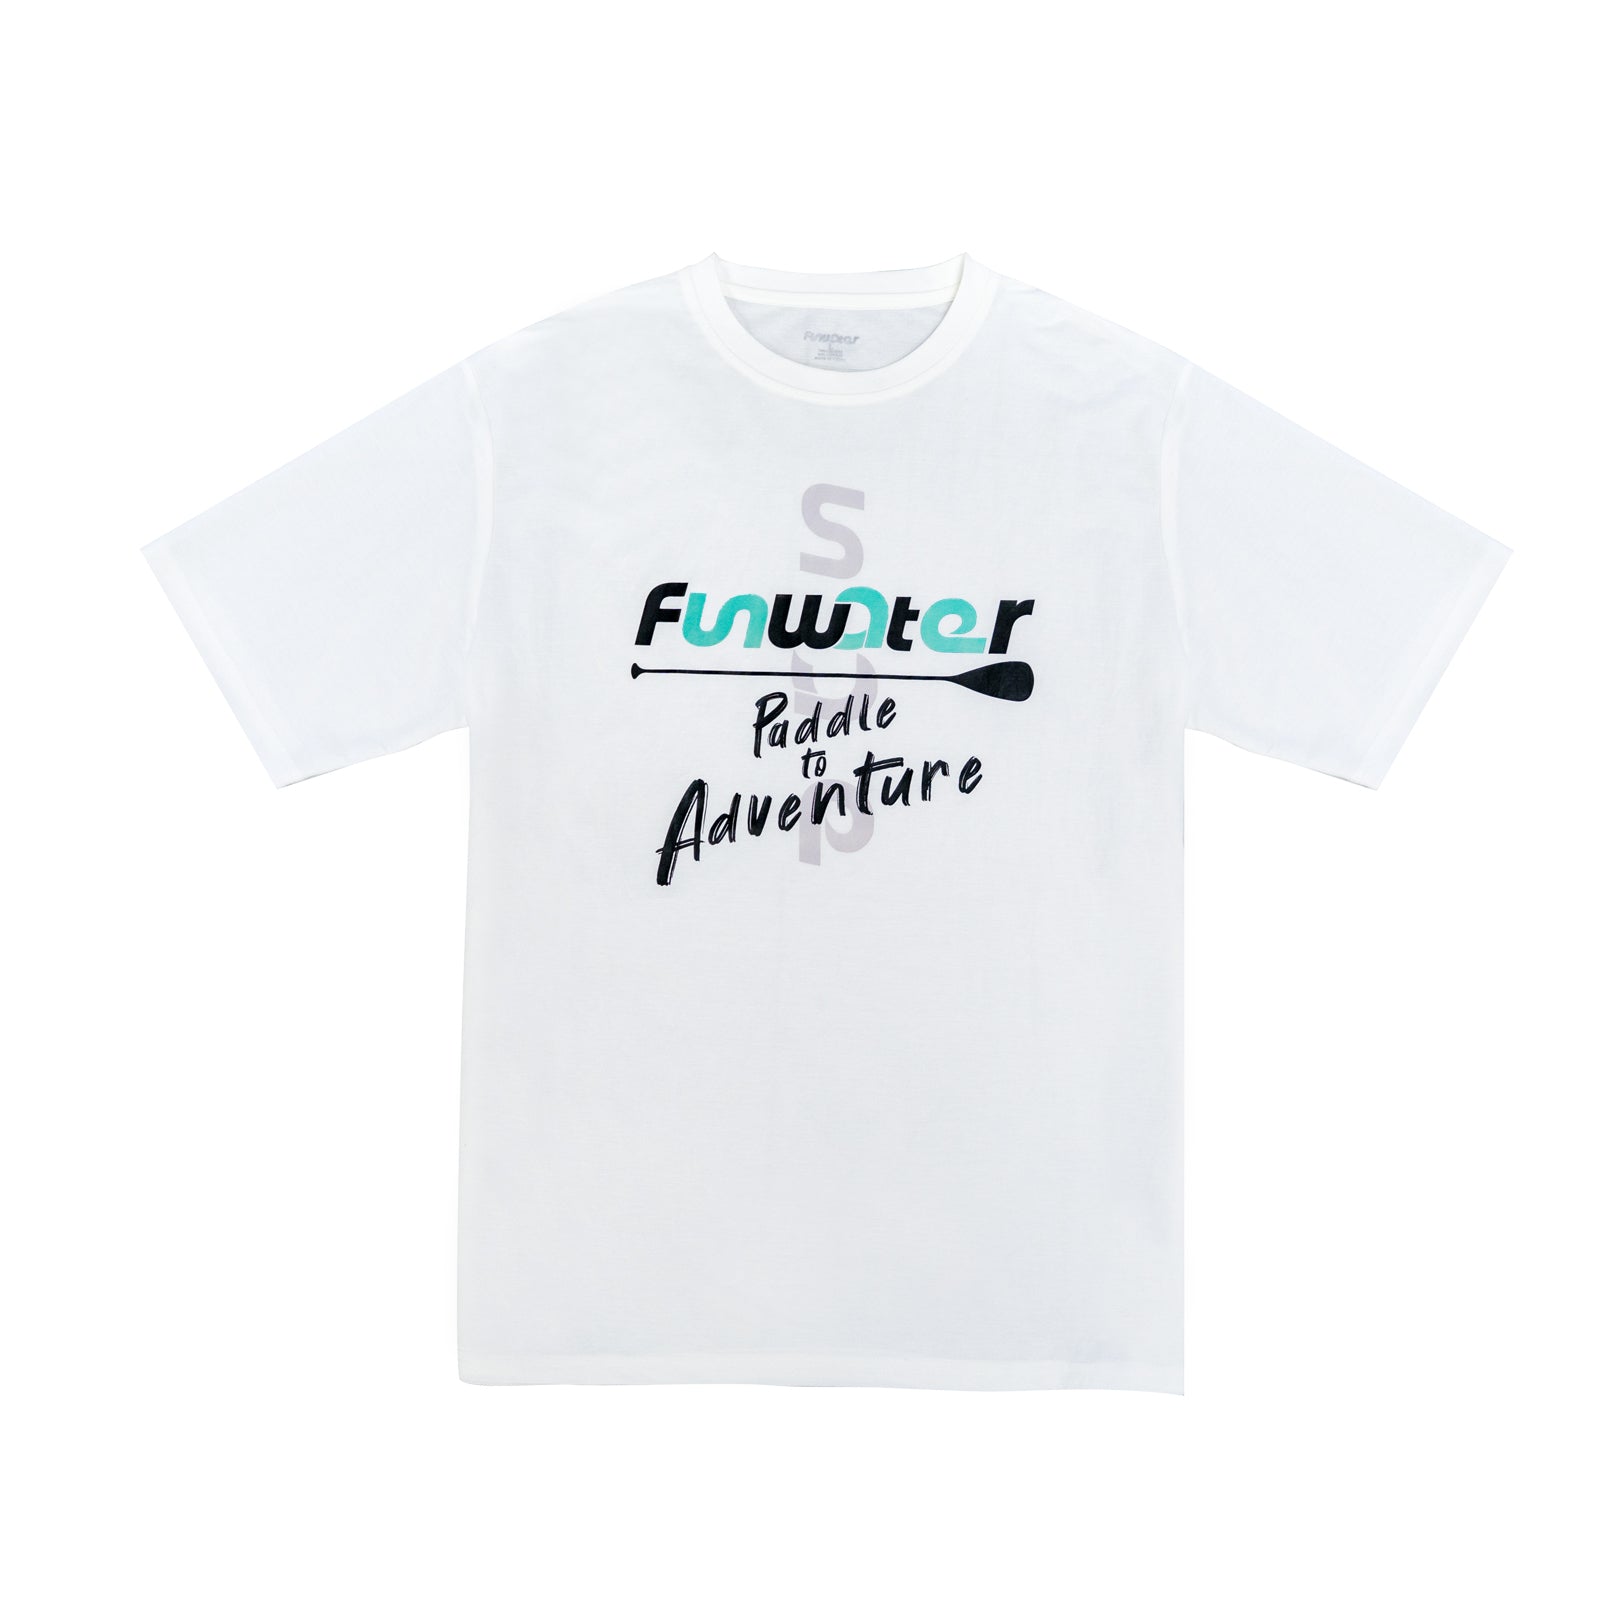 funwater stand up paddle board outdoor leisure sports soft white round neck T-shirt